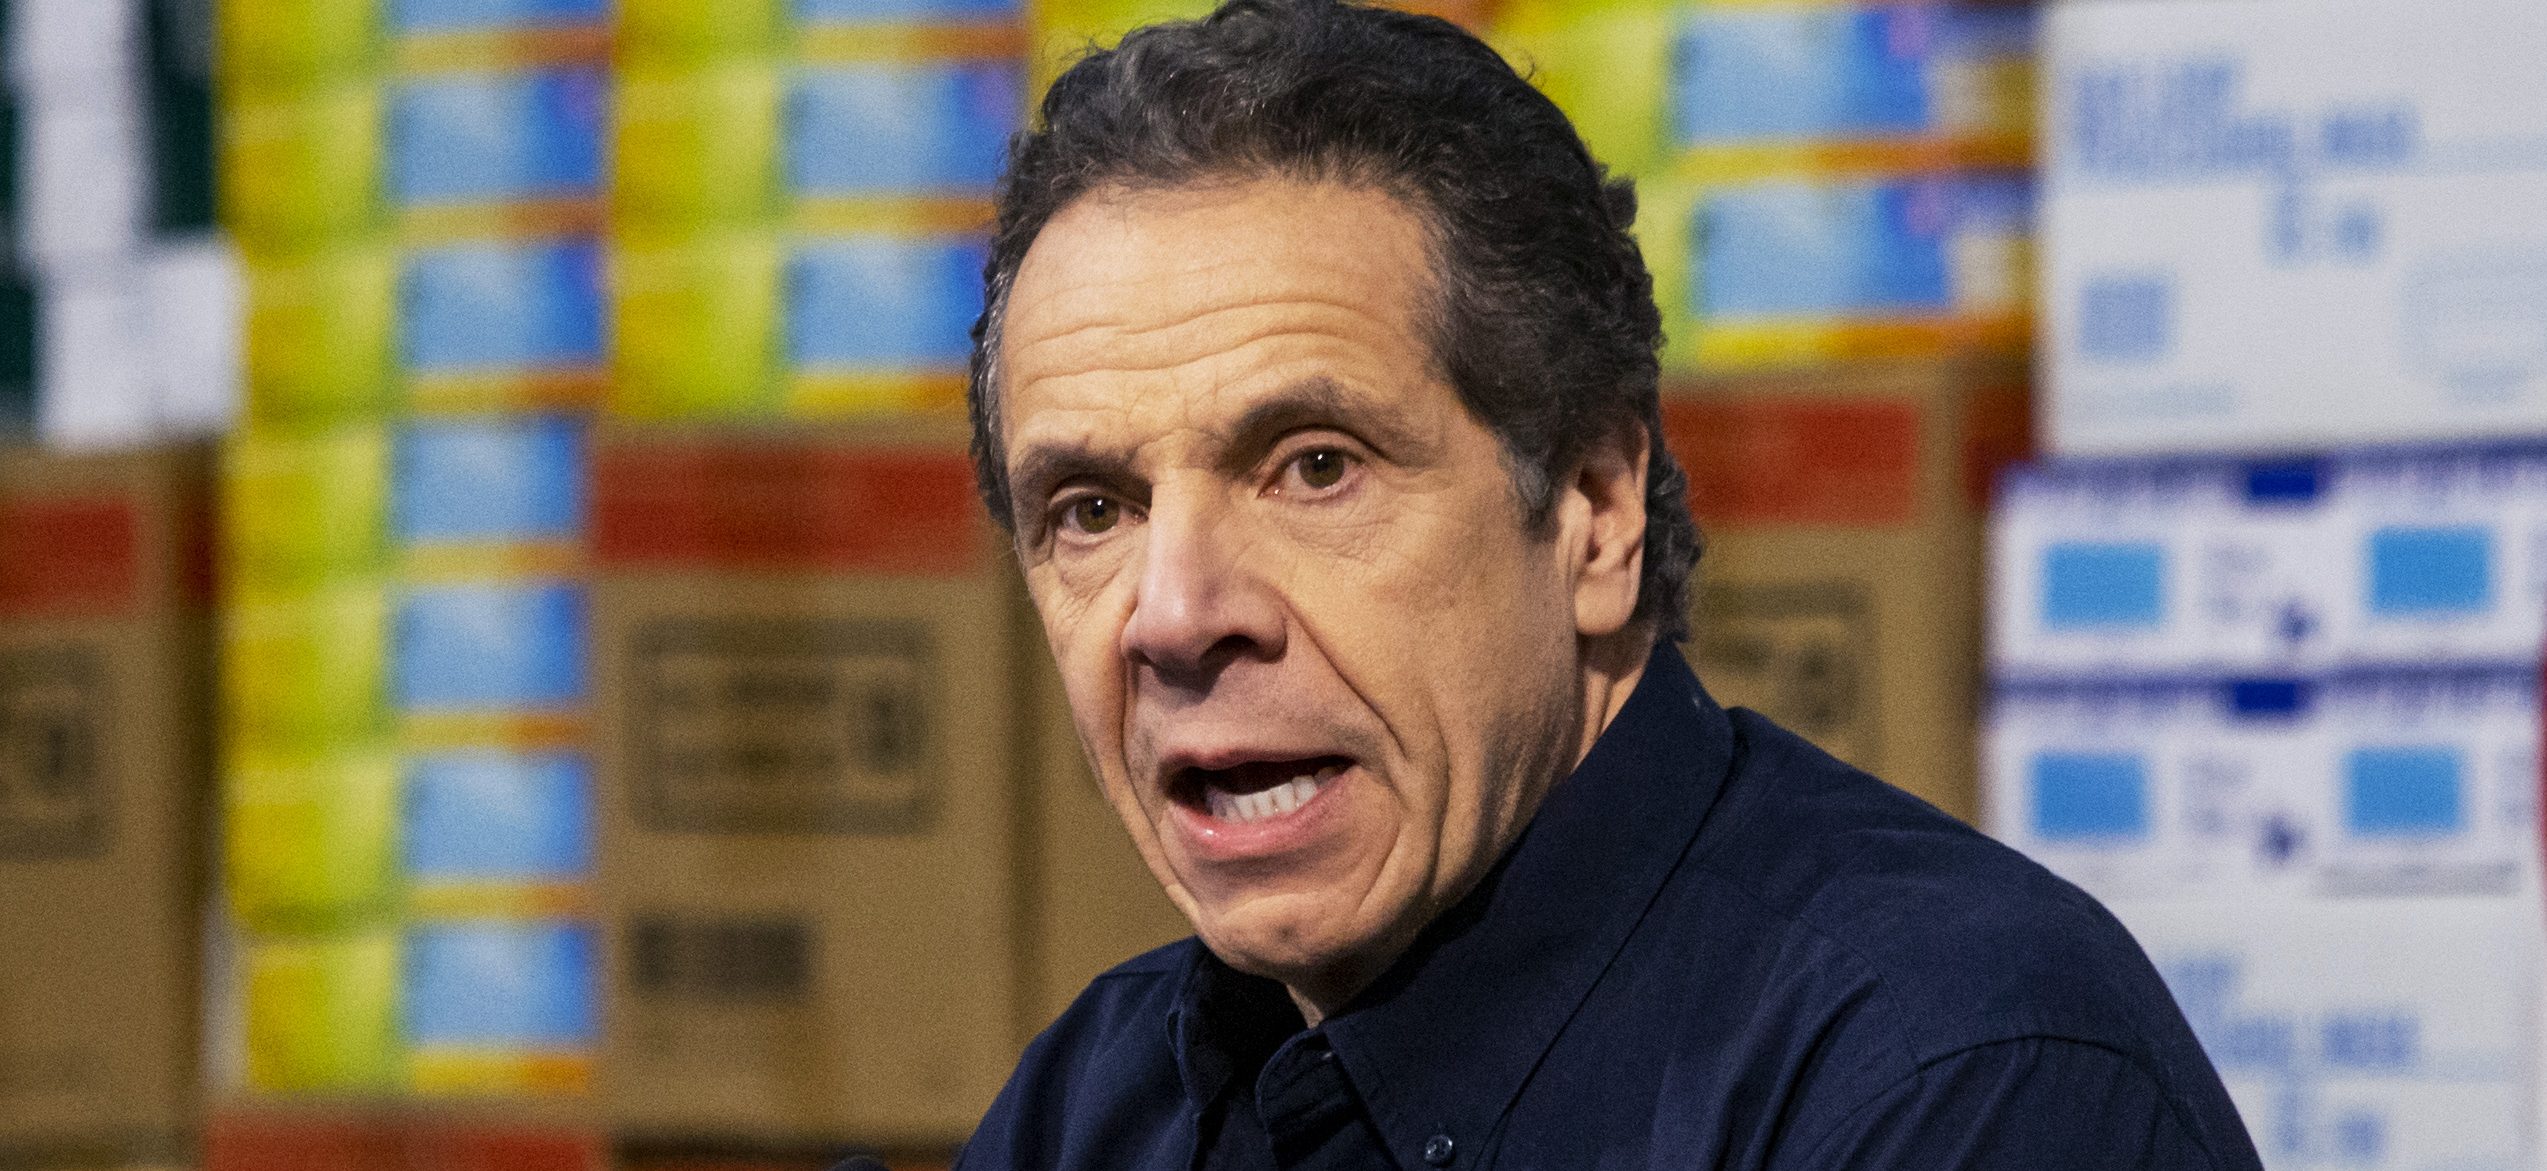 Andrew Cuomo Quotes Father's Famous Speech During Press ...